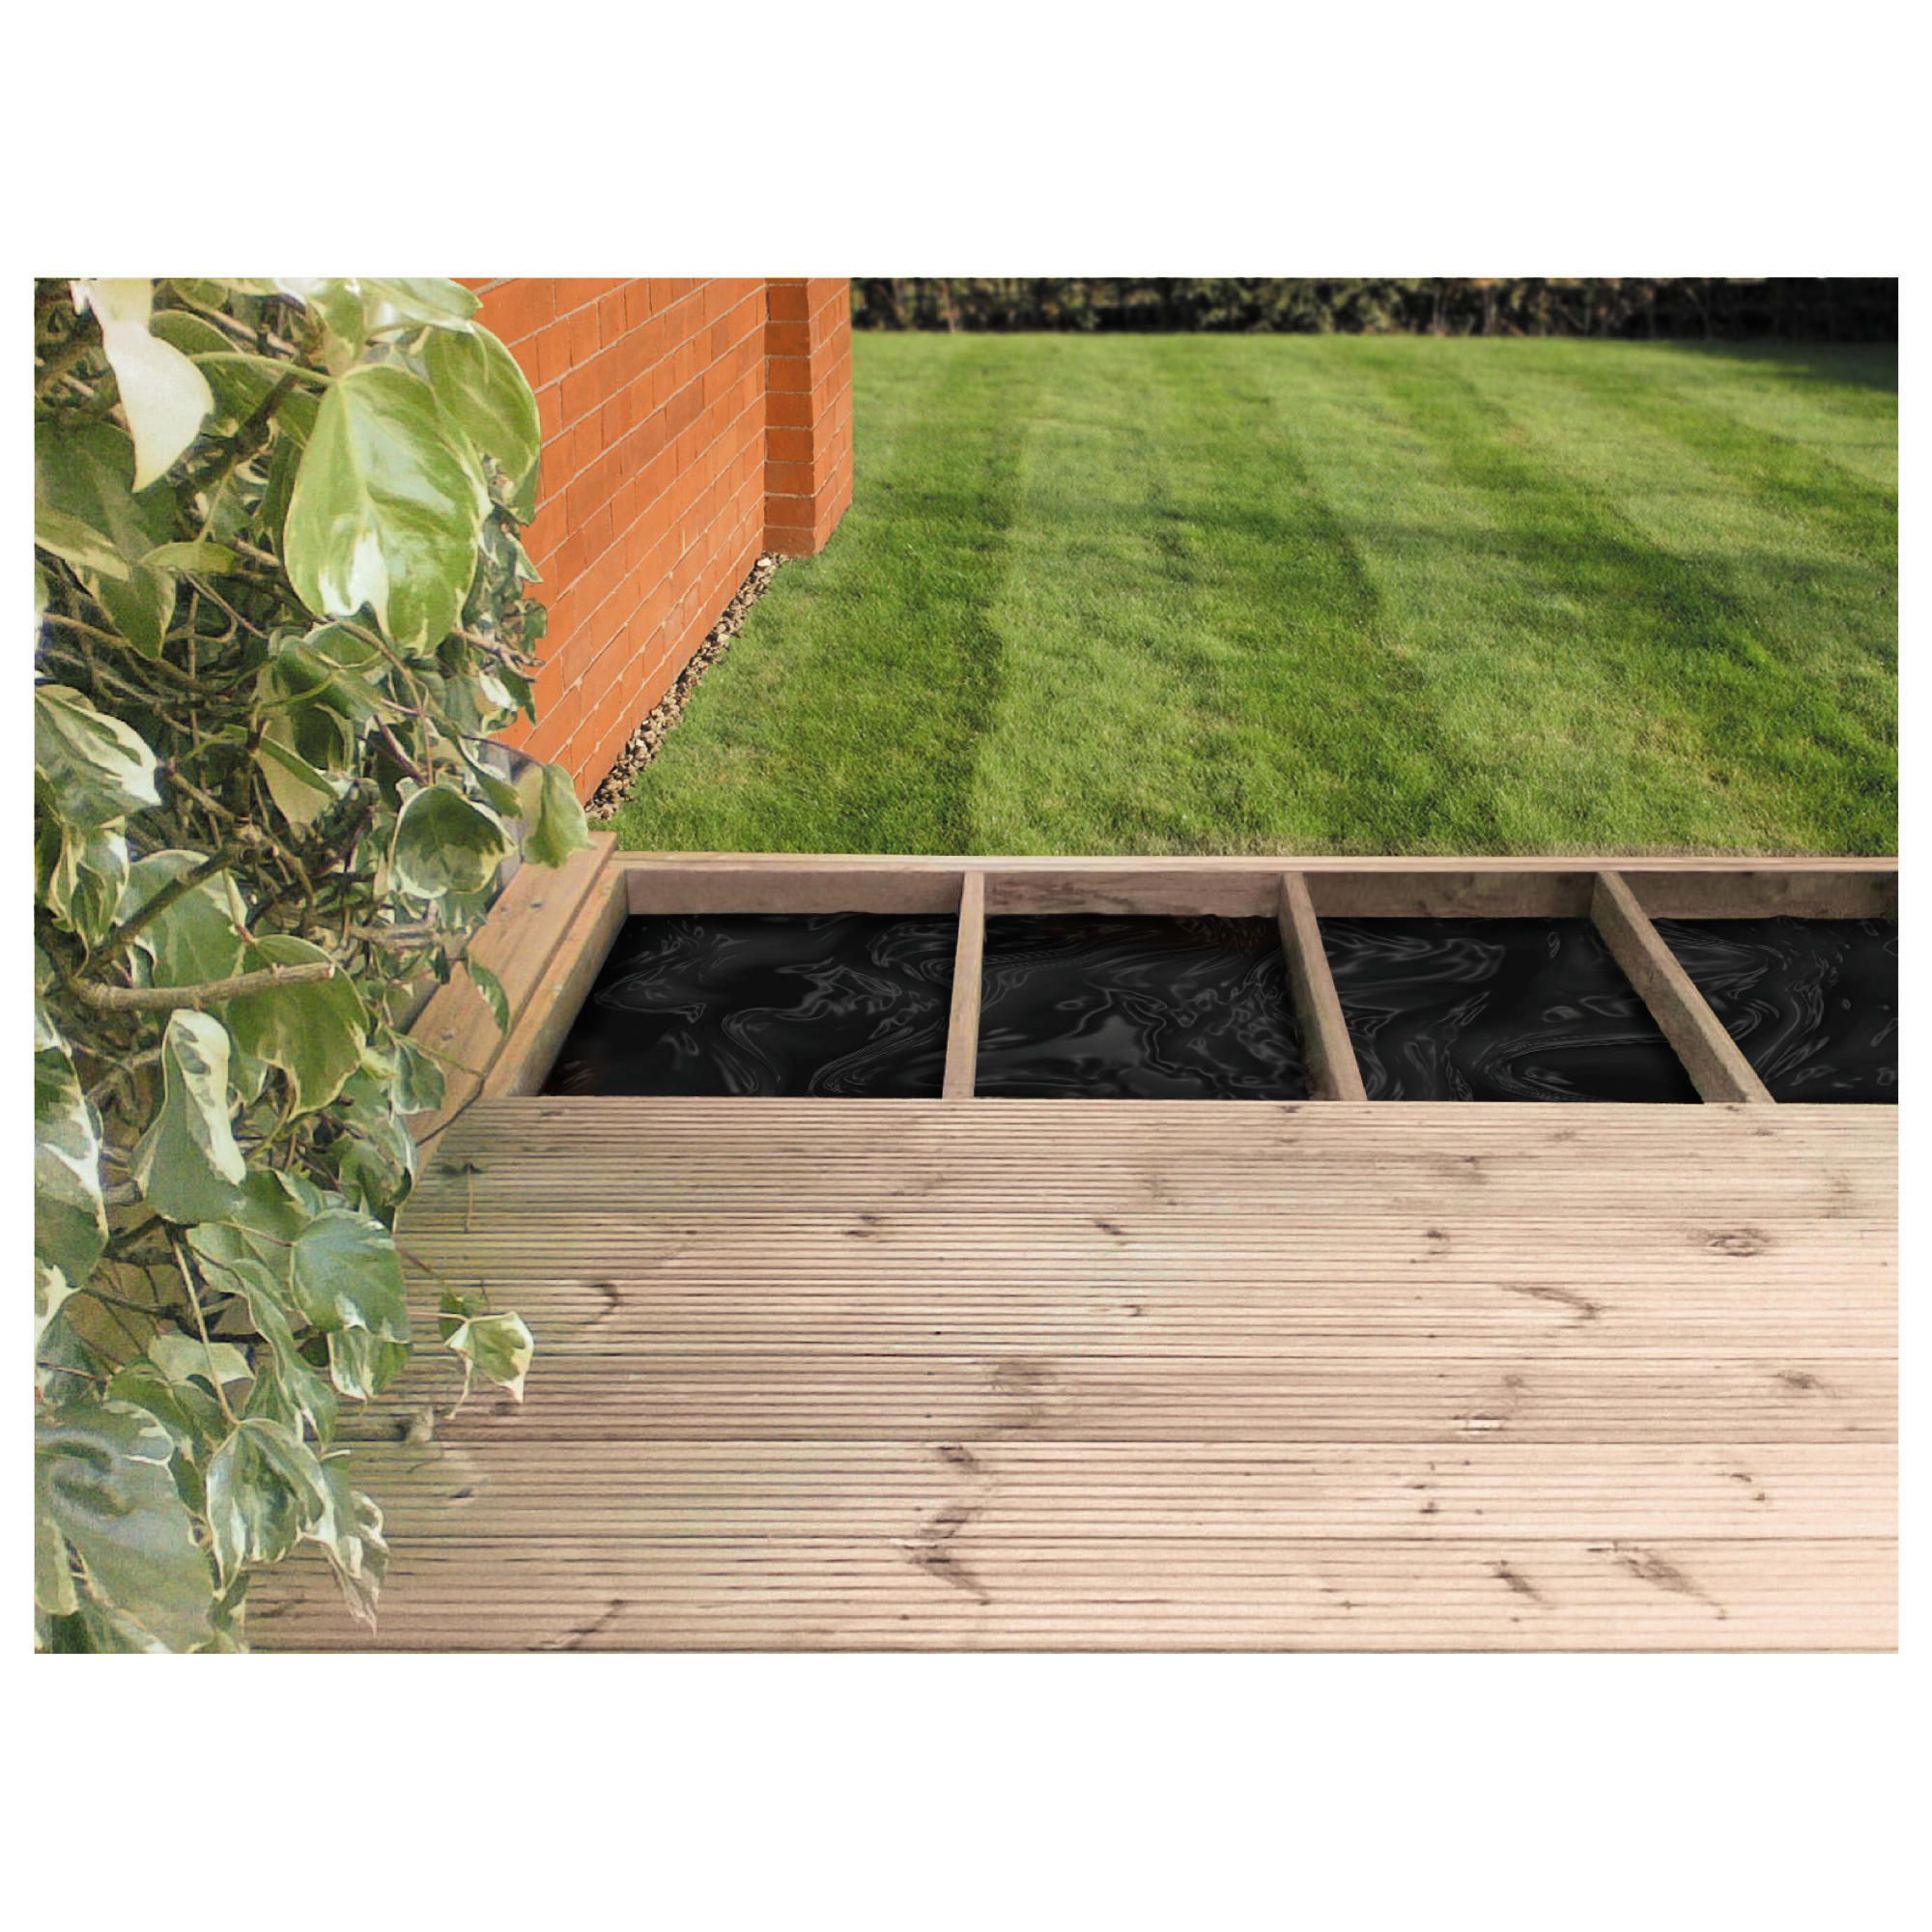 Finnlife Deck and Joist Pack (2.4mx4.8m) at Tesco Direct